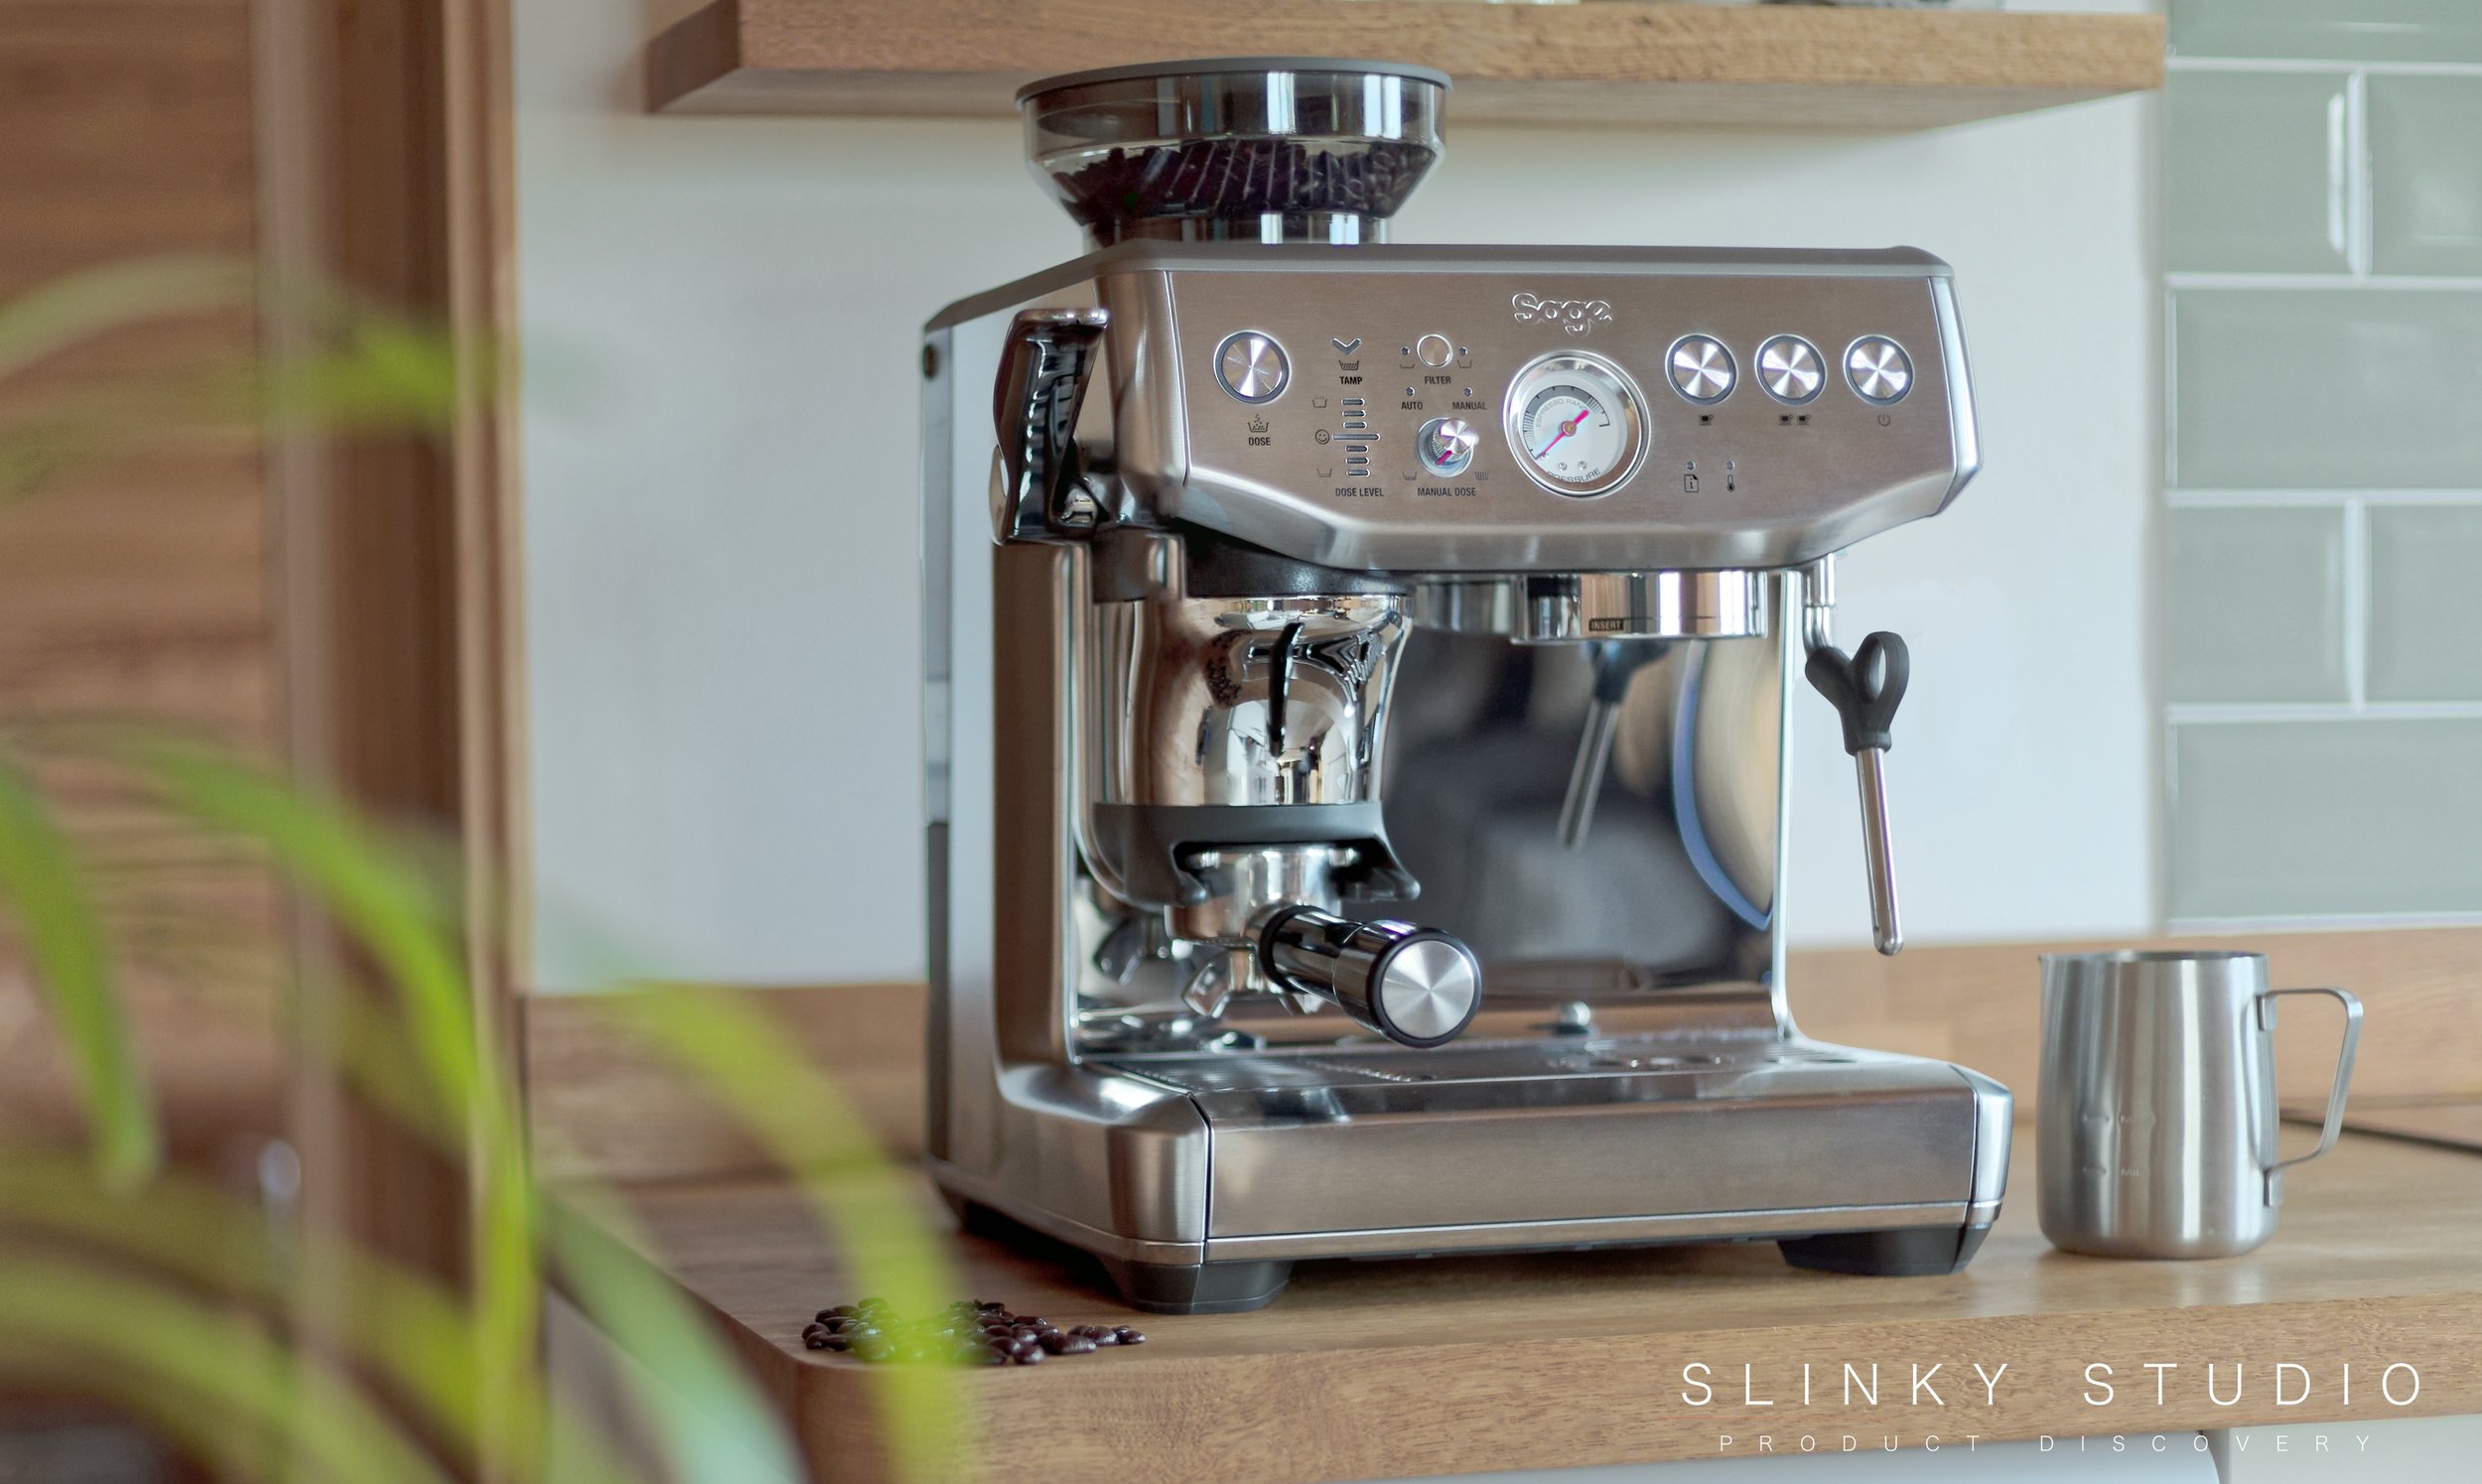 Sage Barista Express Impress Review: A moment 'at home' coffee - Slinky Studio